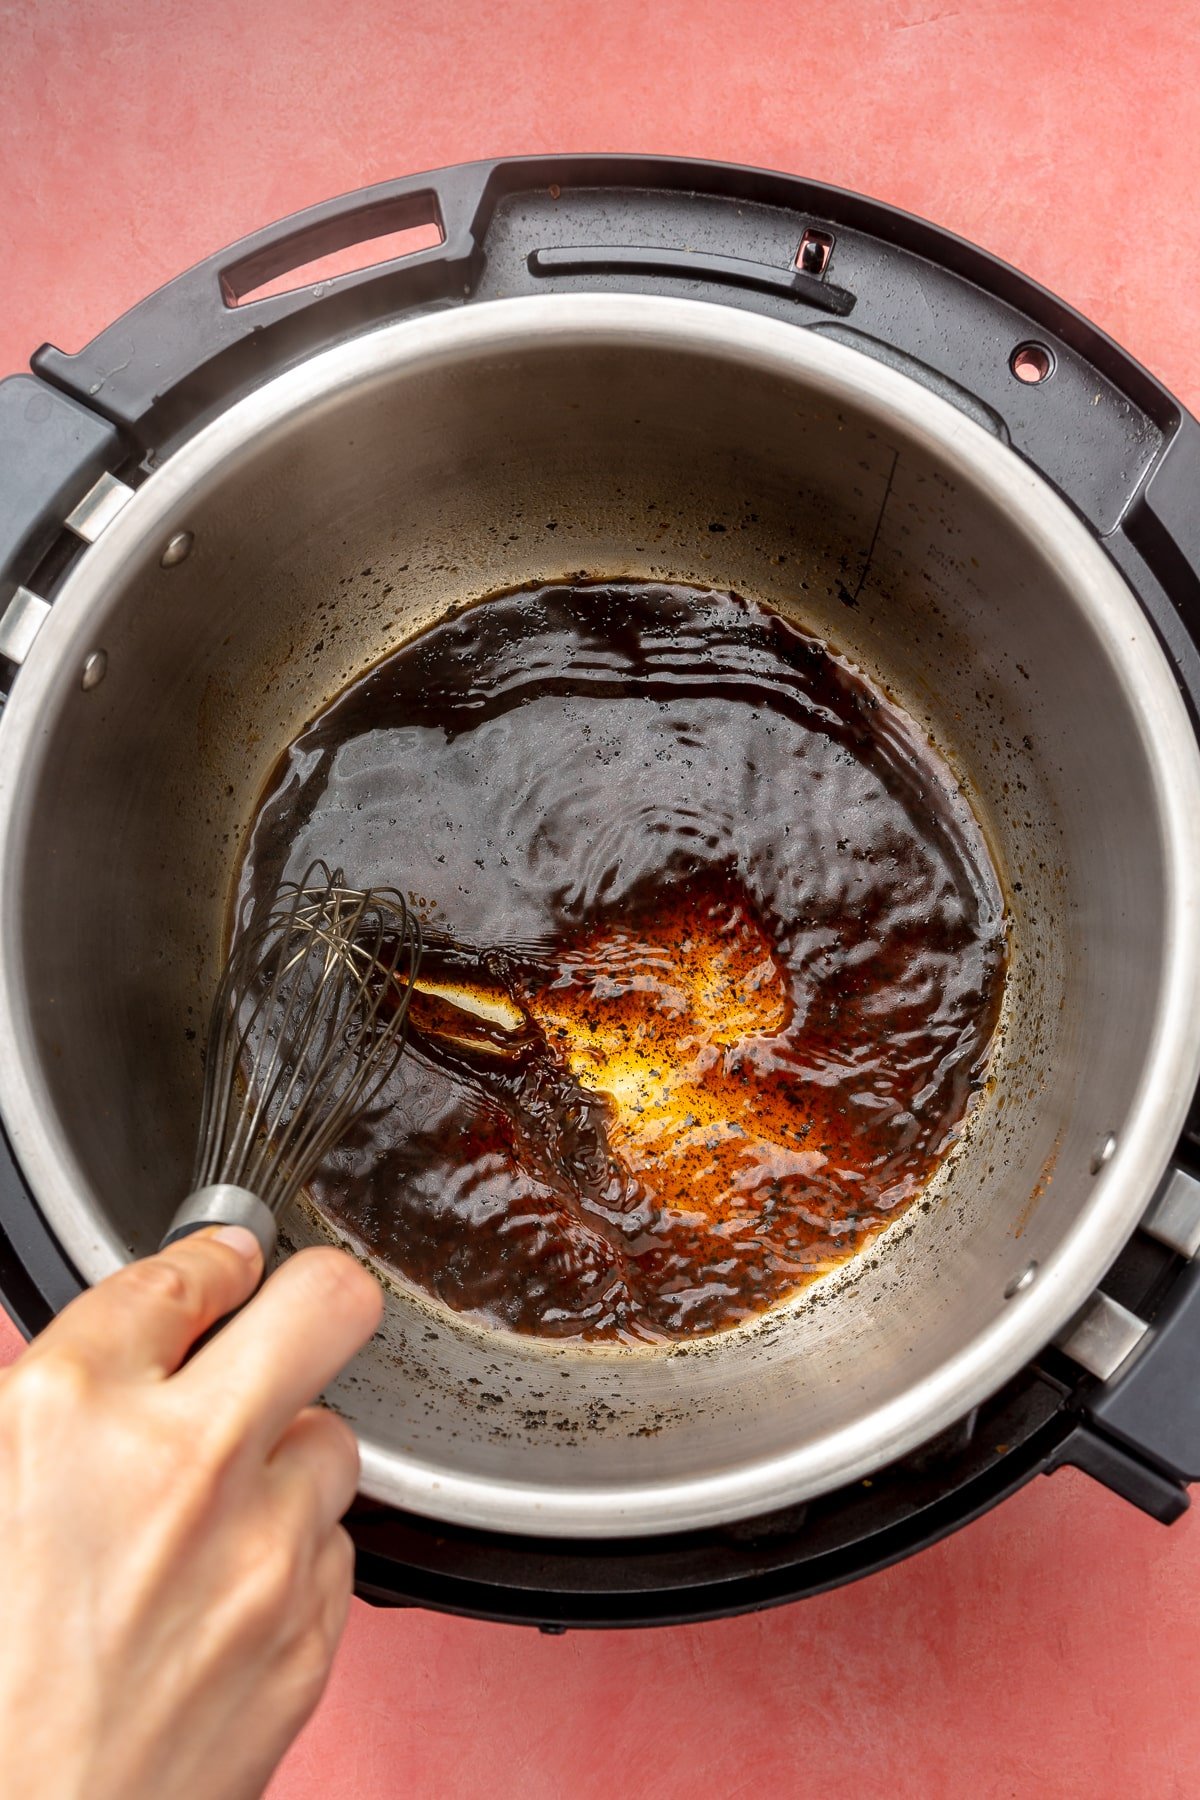 A hand is shown, using a whisk, mixing a thick brown sauce which sits in the bottom of an instant pot.